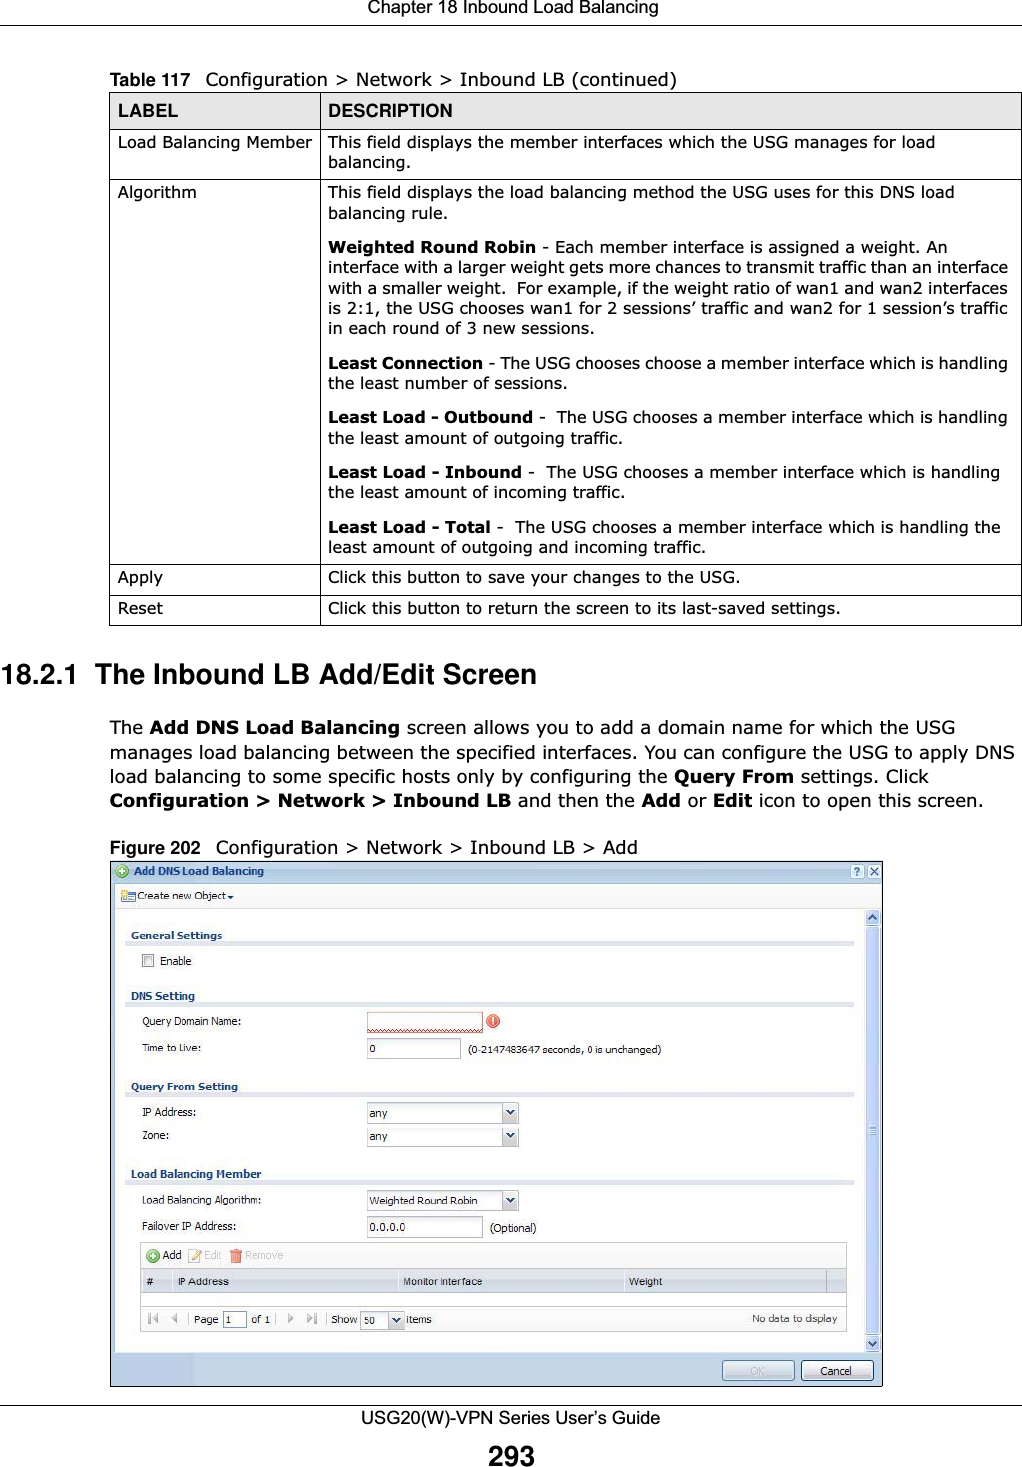  Chapter 18 Inbound Load BalancingUSG20(W)-VPN Series User’s Guide29318.2.1  The Inbound LB Add/Edit ScreenThe Add DNS Load Balancing screen allows you to add a domain name for which the USG manages load balancing between the specified interfaces. You can configure the USG to apply DNS load balancing to some specific hosts only by configuring the Query From settings. Click Configuration &gt; Network &gt; Inbound LB and then the Add or Edit icon to open this screen.Figure 202   Configuration &gt; Network &gt; Inbound LB &gt; Add Load Balancing Member This field displays the member interfaces which the USG manages for load balancing.Algorithm This field displays the load balancing method the USG uses for this DNS load balancing rule.Weighted Round Robin - Each member interface is assigned a weight. An interface with a larger weight gets more chances to transmit traffic than an interface with a smaller weight.  For example, if the weight ratio of wan1 and wan2 interfaces is 2:1, the USG chooses wan1 for 2 sessions’ traffic and wan2 for 1 session’s traffic in each round of 3 new sessions.Least Connection - The USG chooses choose a member interface which is handling the least number of sessions.Least Load - Outbound -  The USG chooses a member interface which is handling the least amount of outgoing traffic.Least Load - Inbound -  The USG chooses a member interface which is handling the least amount of incoming traffic.Least Load - Total -  The USG chooses a member interface which is handling the least amount of outgoing and incoming traffic.Apply Click this button to save your changes to the USG. Reset Click this button to return the screen to its last-saved settings. Table 117   Configuration &gt; Network &gt; Inbound LB (continued)LABEL DESCRIPTION